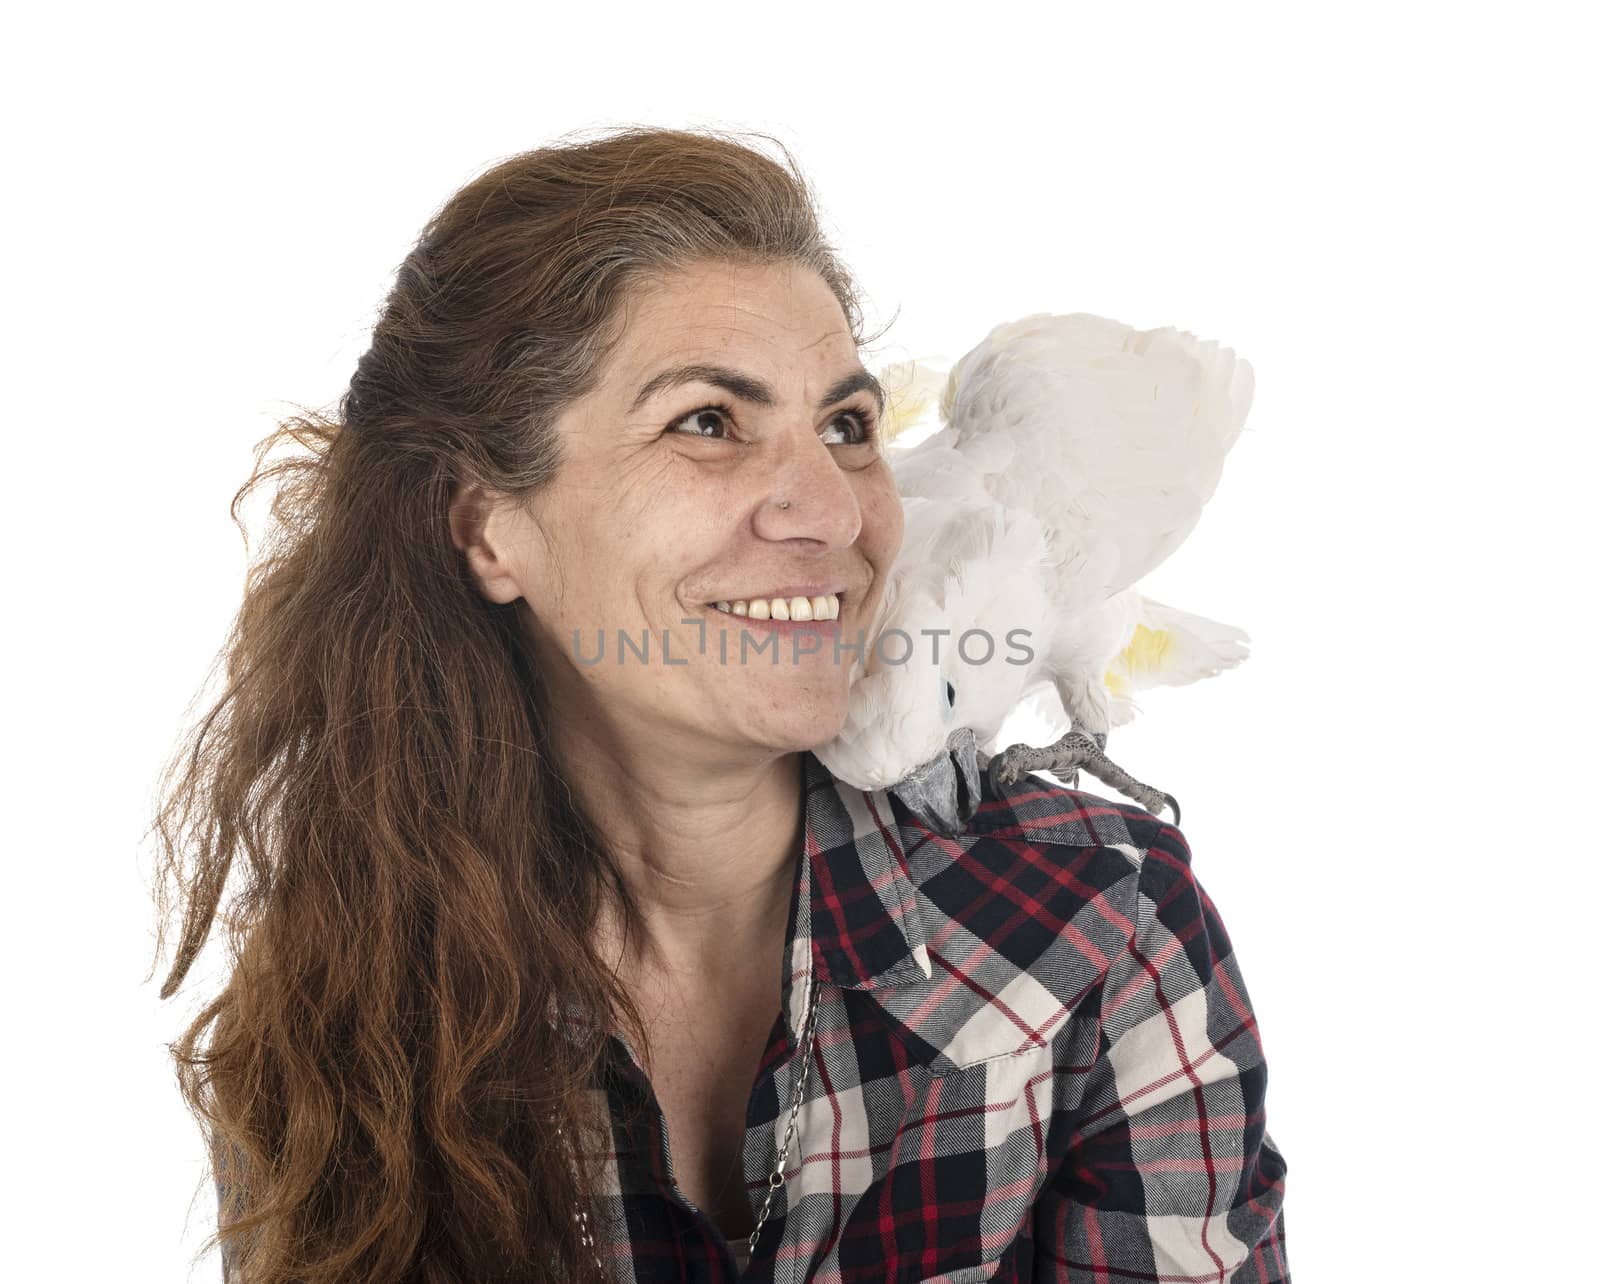 cockatoo and woman by cynoclub